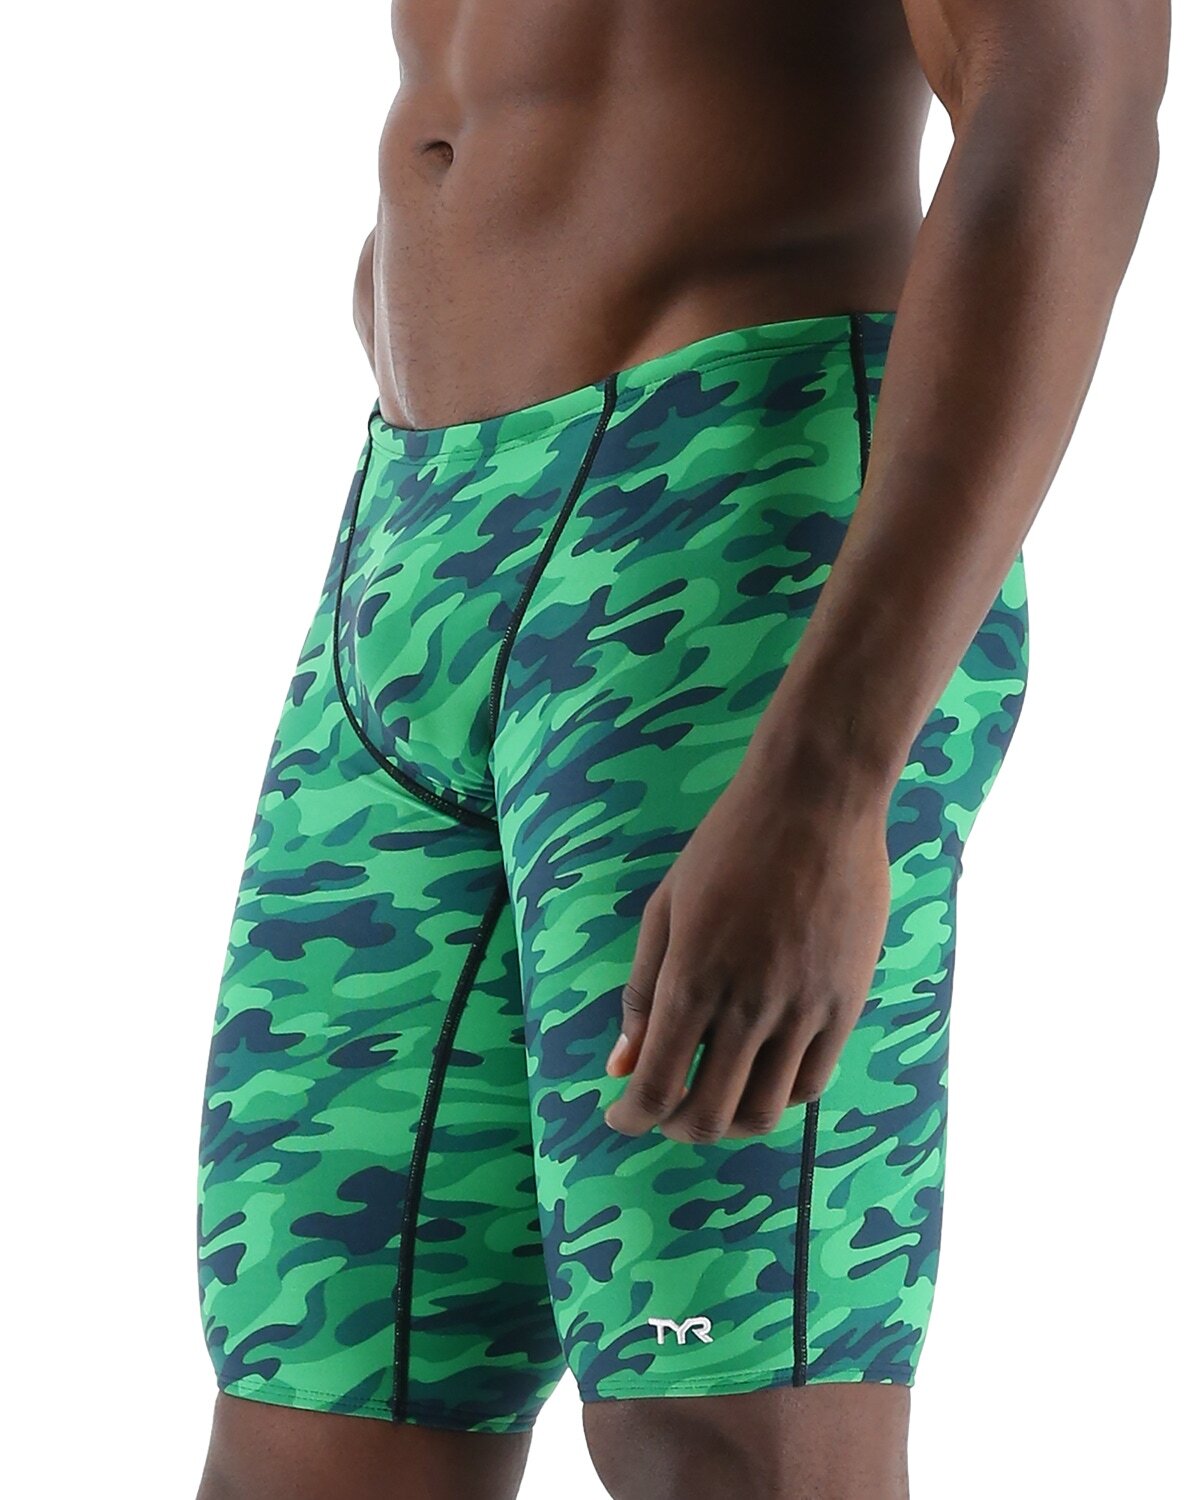 TYR Green Camo Jammer Size 30